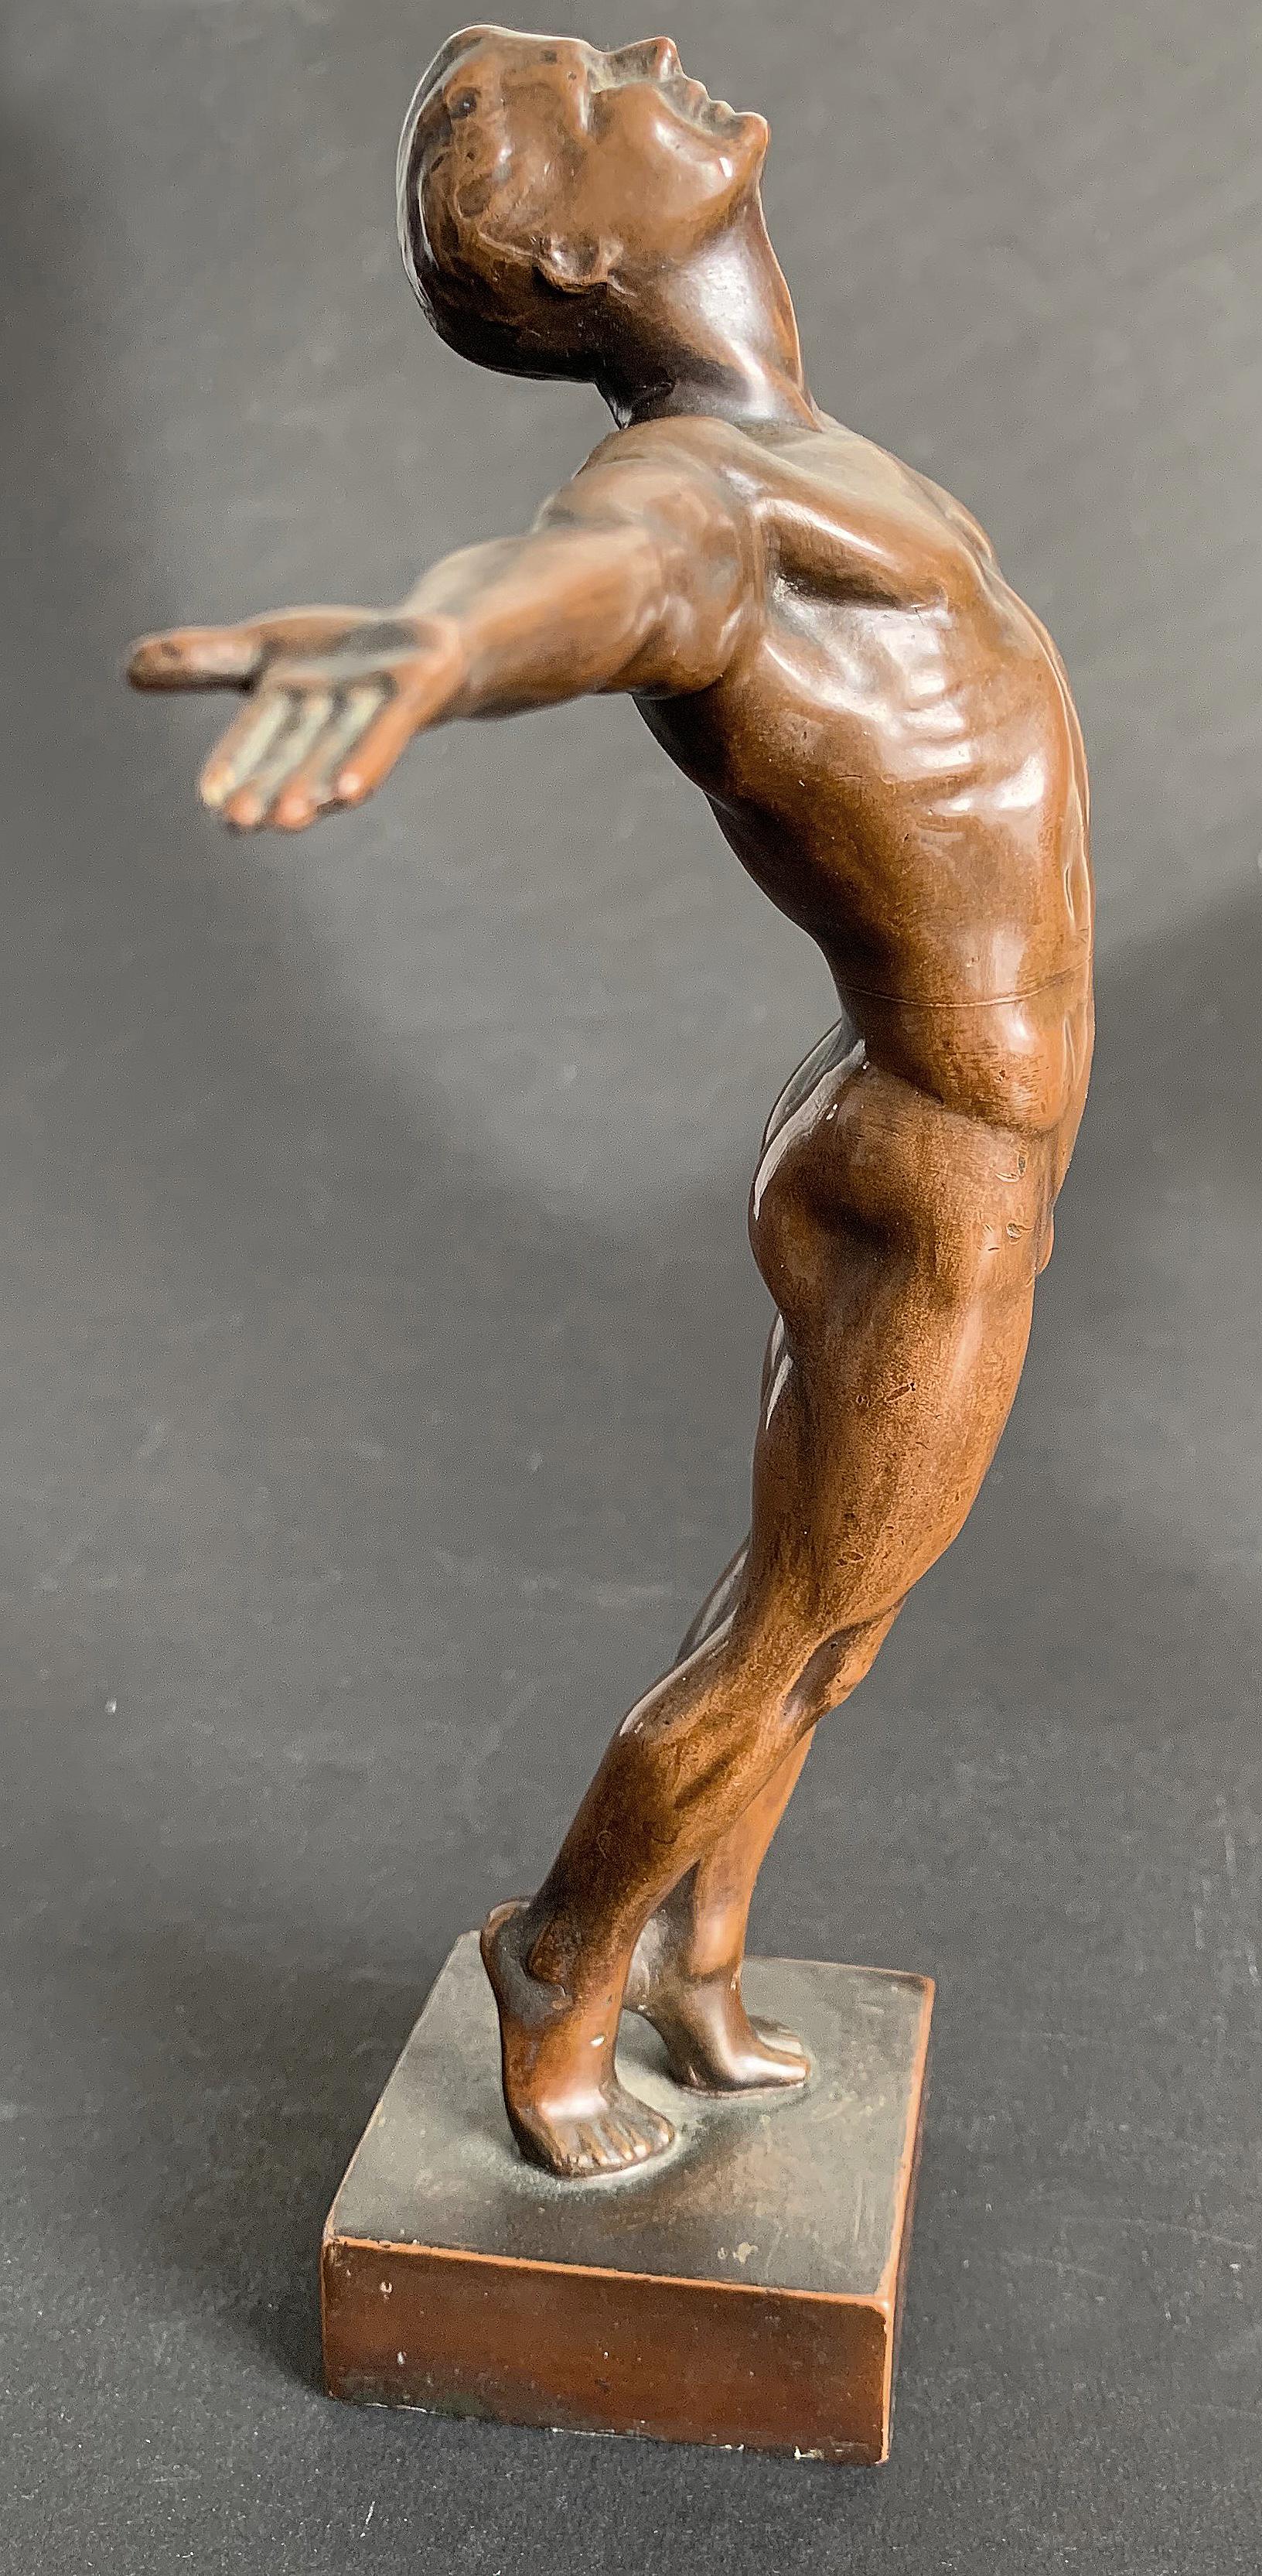 Early 20th Century ‘Dedication to Service, ’ Rare Art Deco Sculpture with Male Nude by Burnham